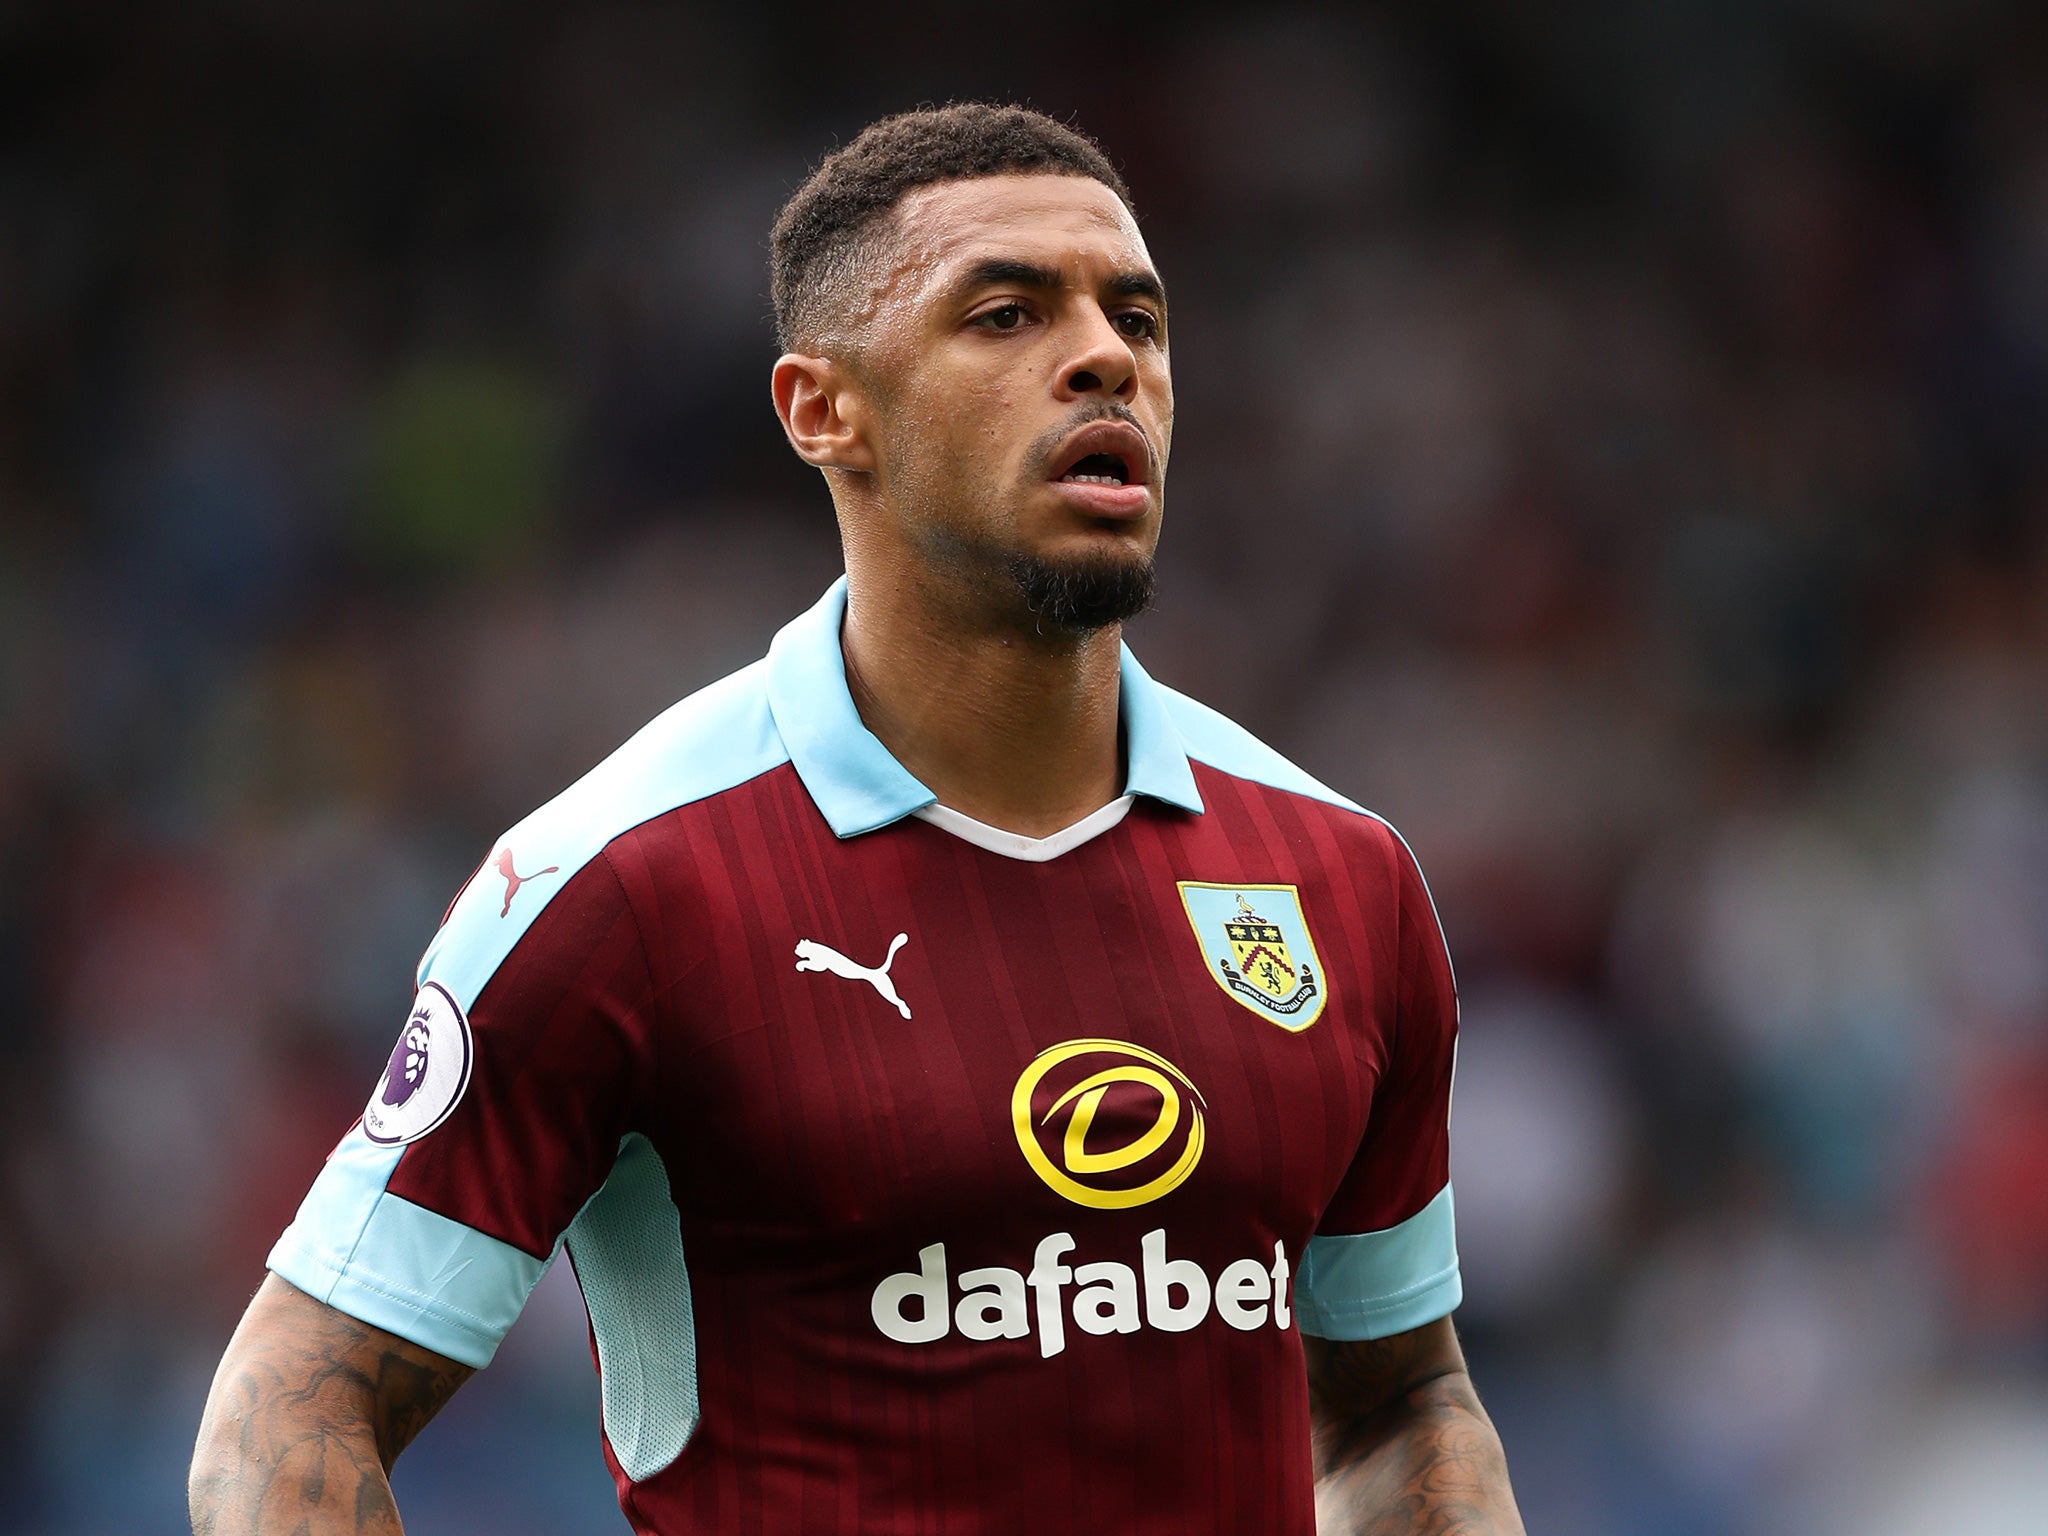 Gray scored in Burnley's 2-0 win against Liverpool on Saturday